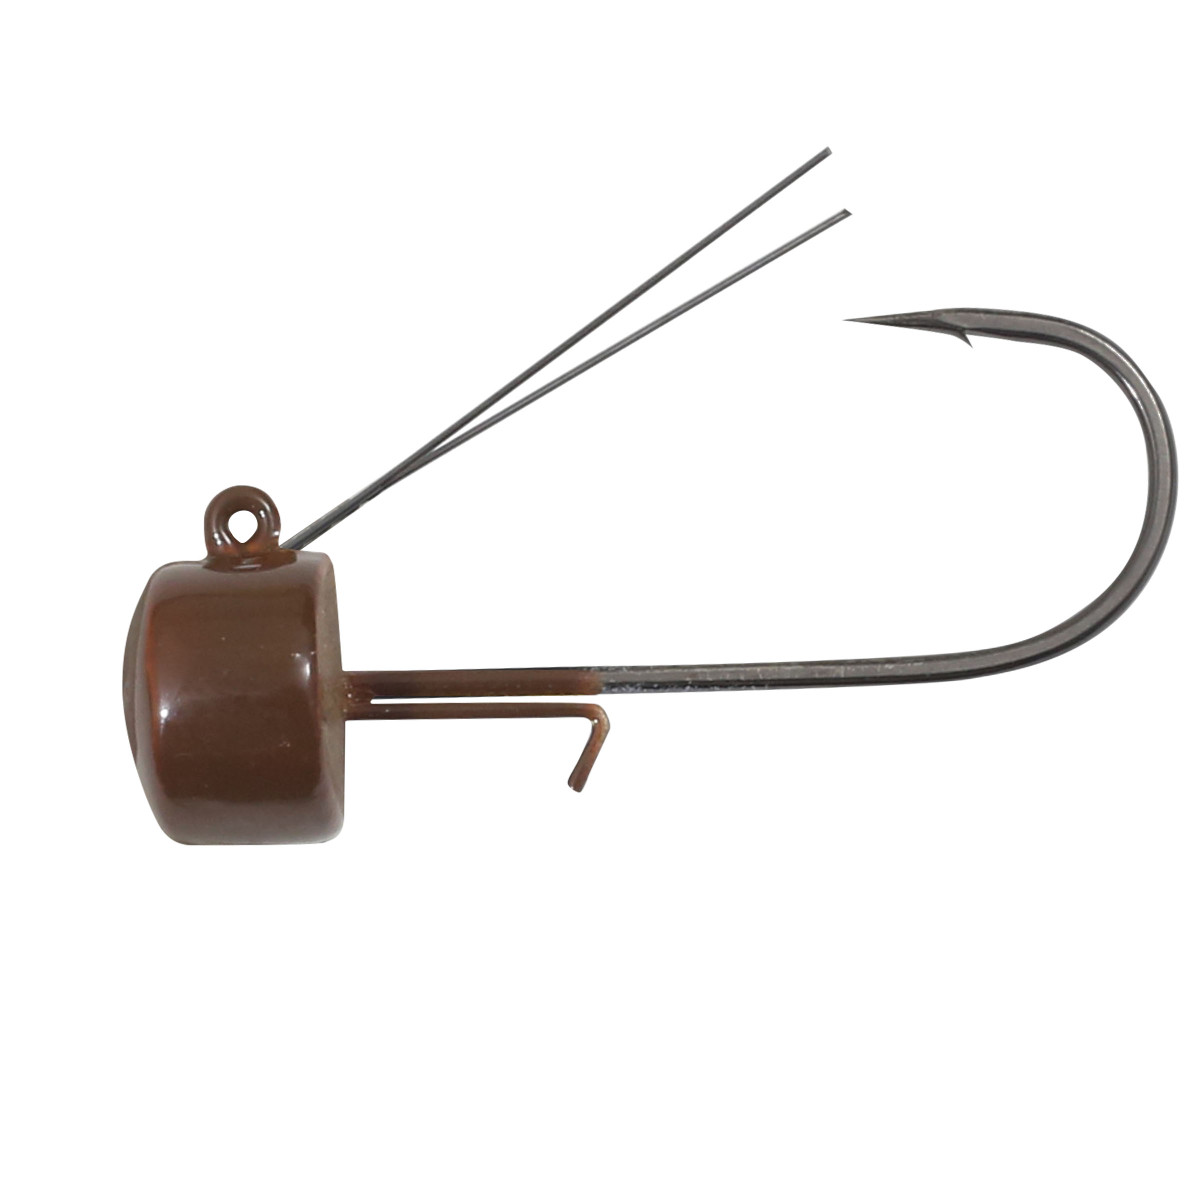 Buy Gift for Husband Wife - Ned Rig Heads - Tackle Inc Sales